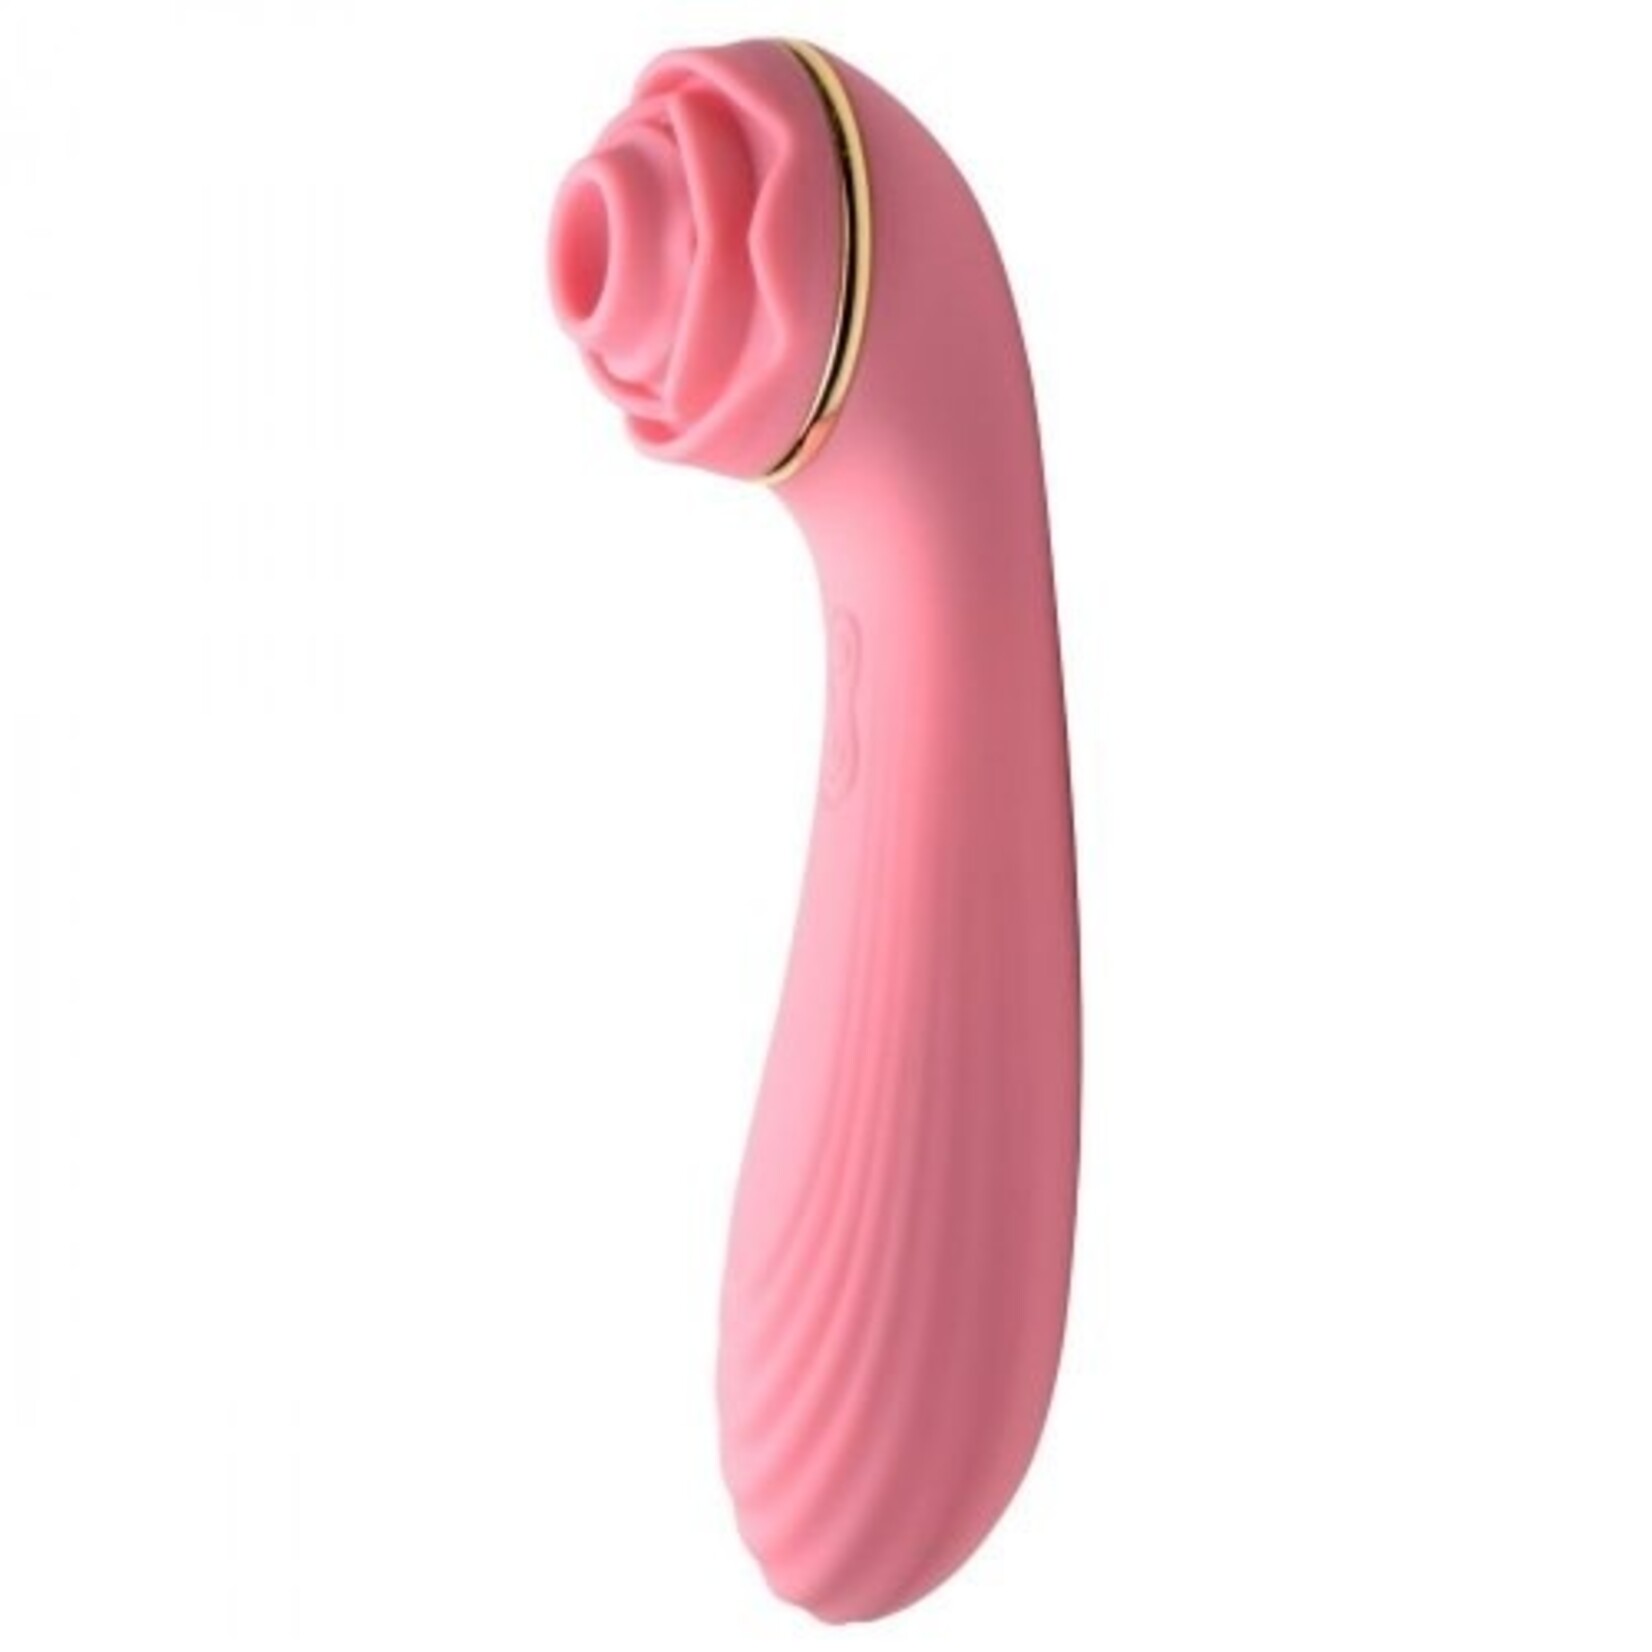 XR BRANDS BLOOMGASM PASSION PETALS 10X SILICONE SUCTION ROSE VIBRATOR - PINK